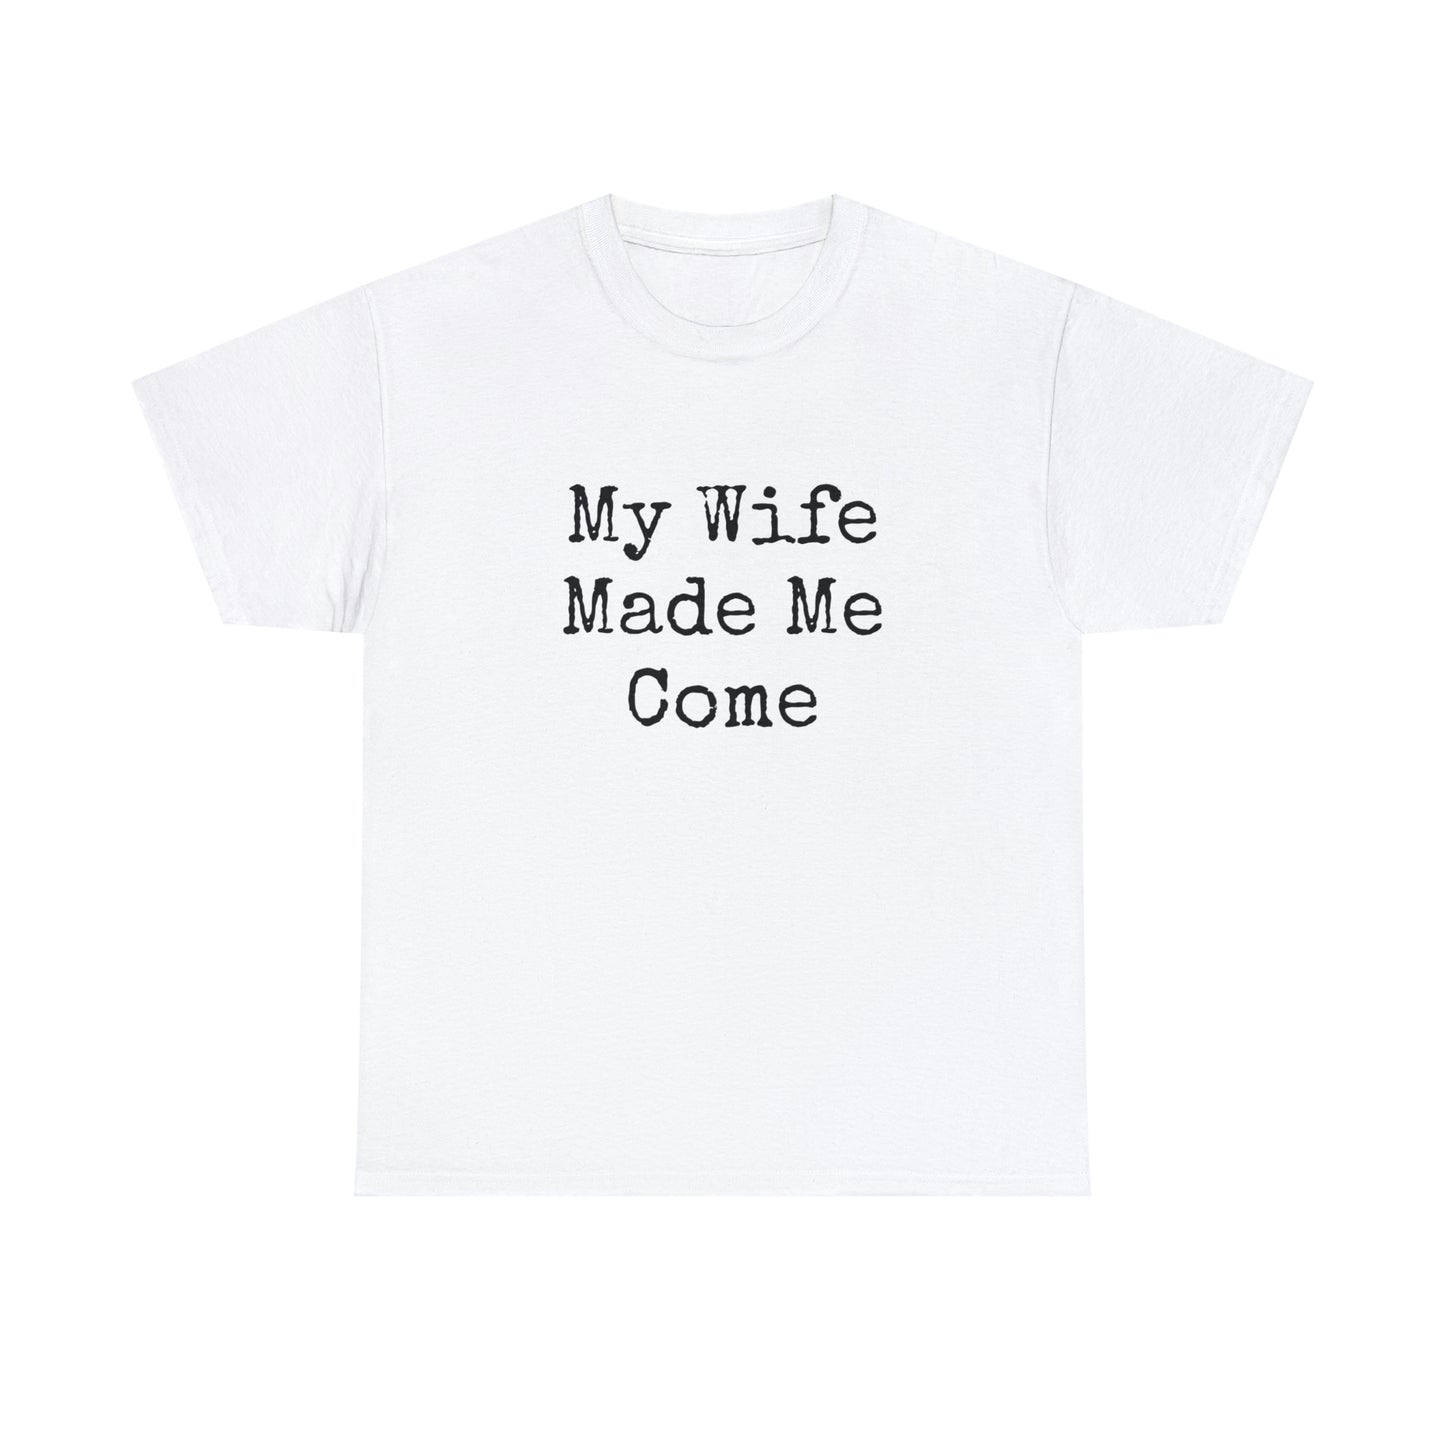 MY WIFE MADE ME COME T-SHIRT